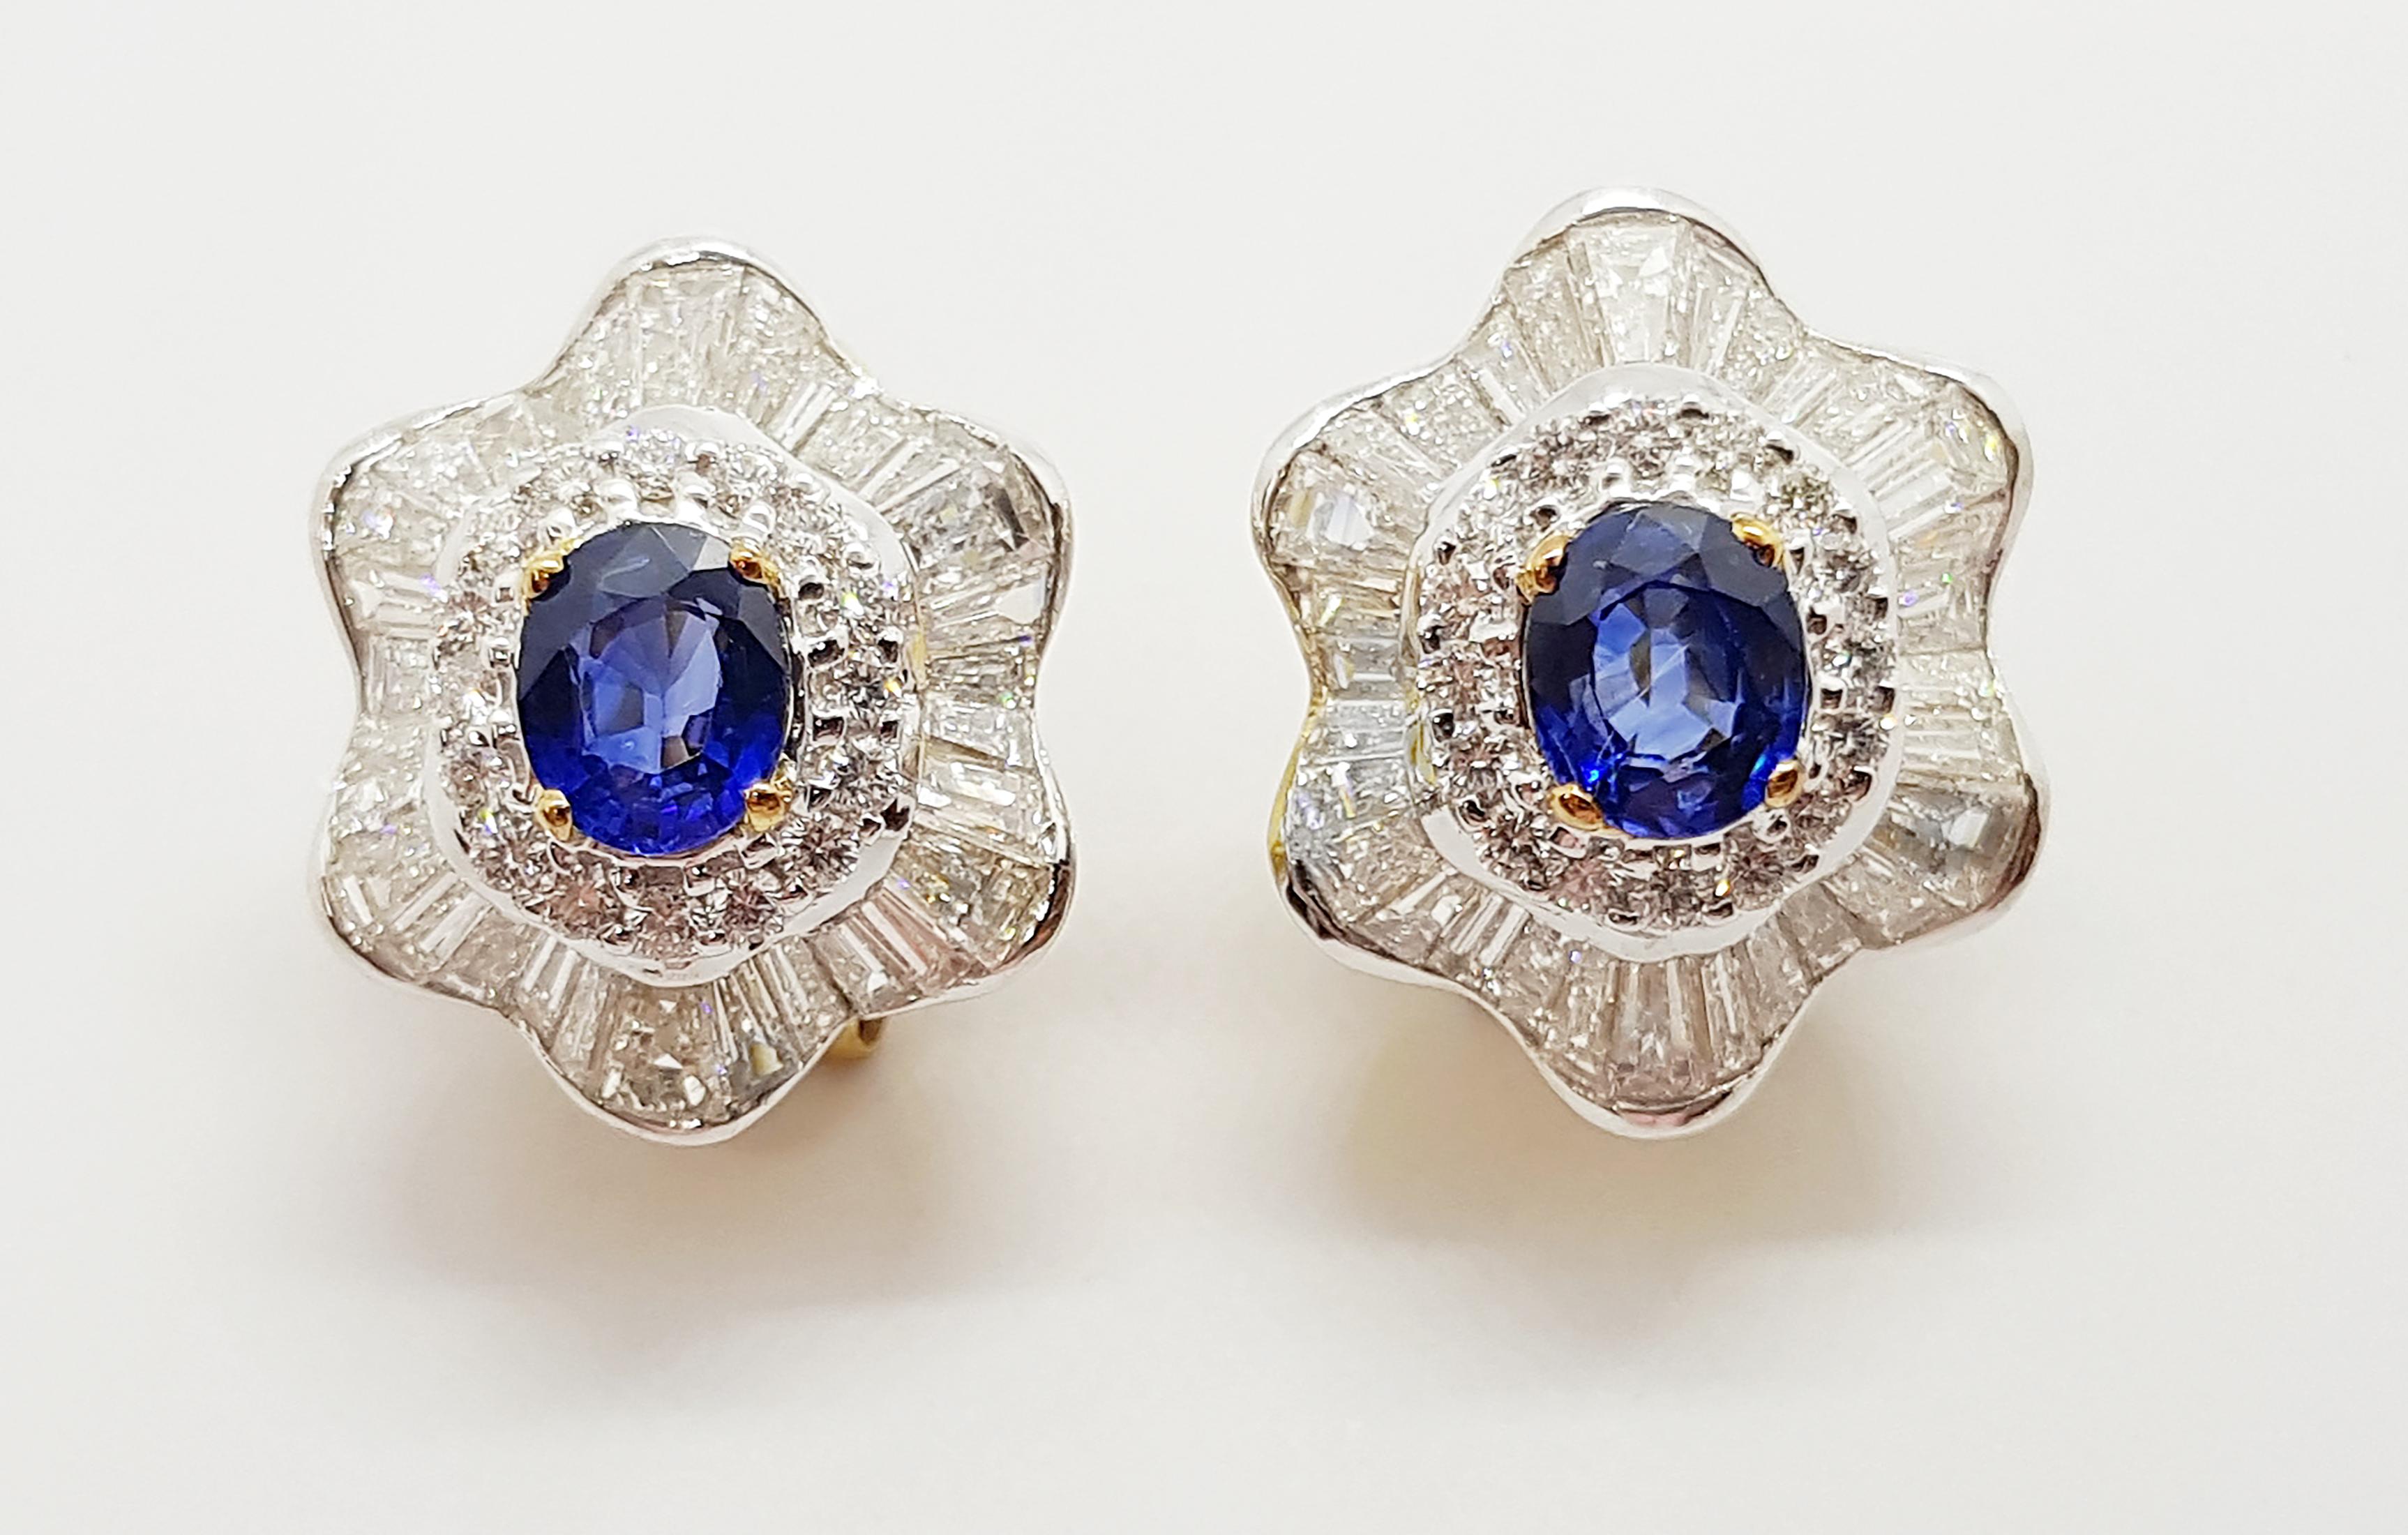 Blue Sapphire 2.35 carats with Diamond 4.71 carats Earrings set in 18 Karat Gold Settings

Width:  1.7 cm 
Length: 2.1 cm
Total Weight: 12.75 grams

